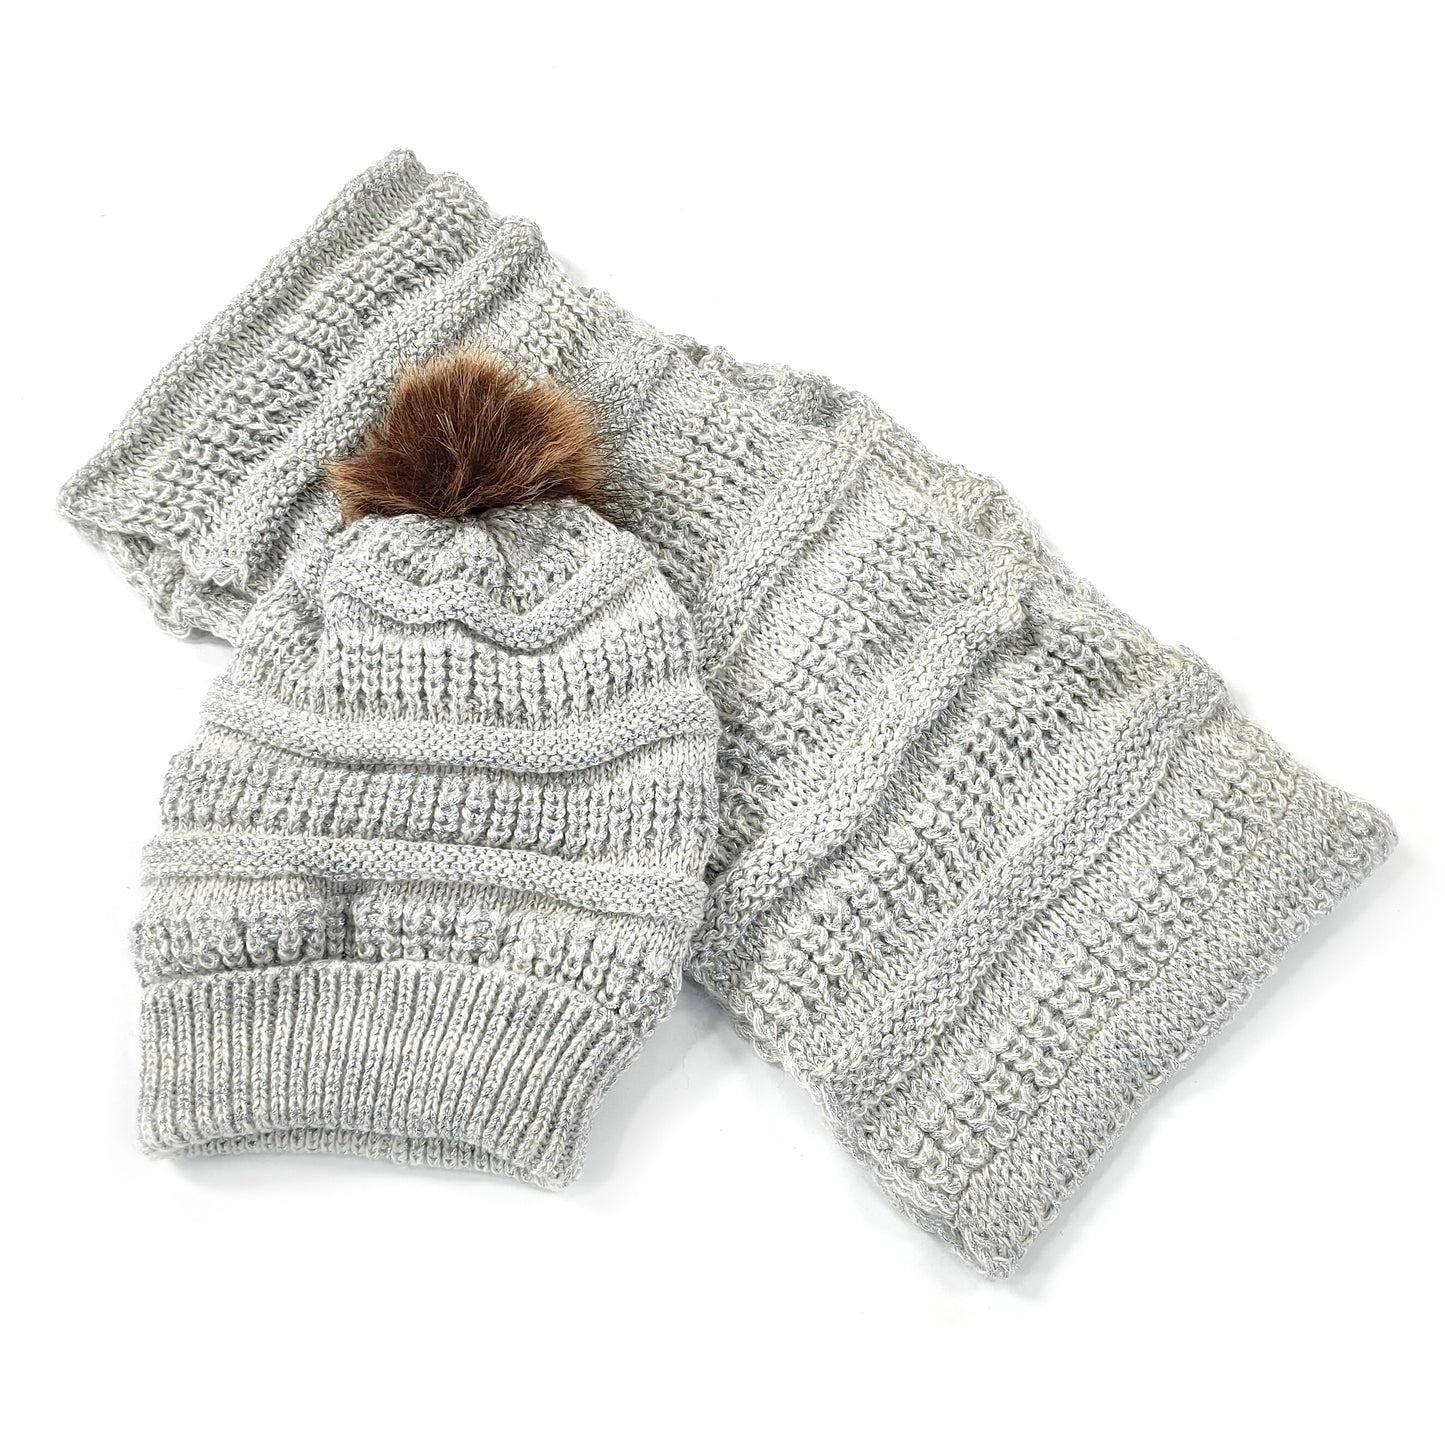 Image shows a matching cable knit bobble hat with brown fluffy pom pom on the top and  grey and silver cable knit snood